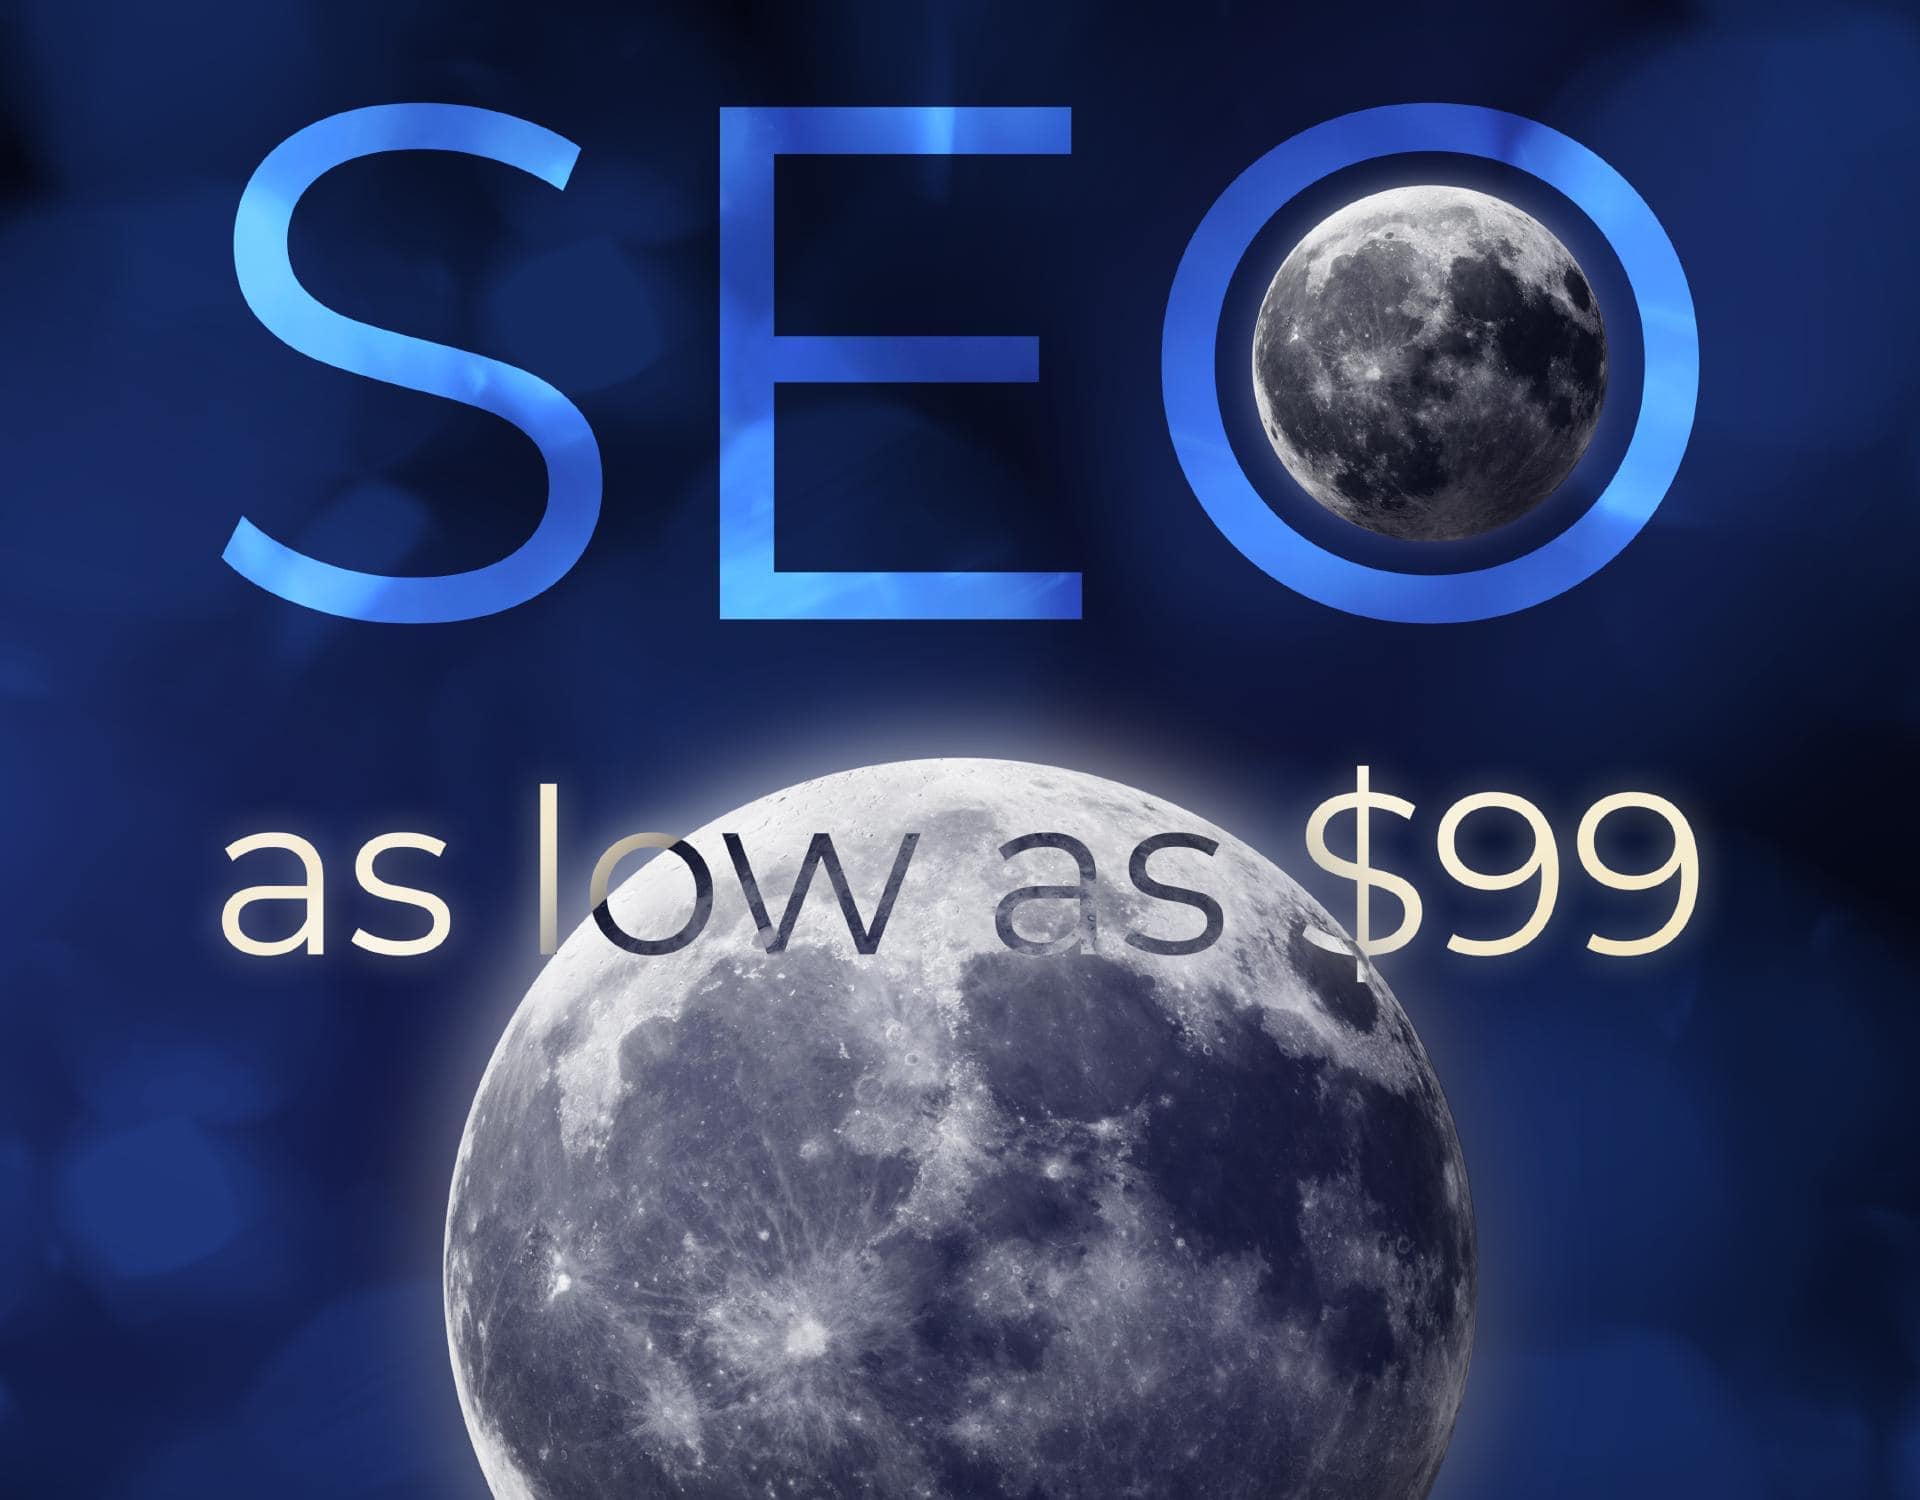 SEO as low as $99